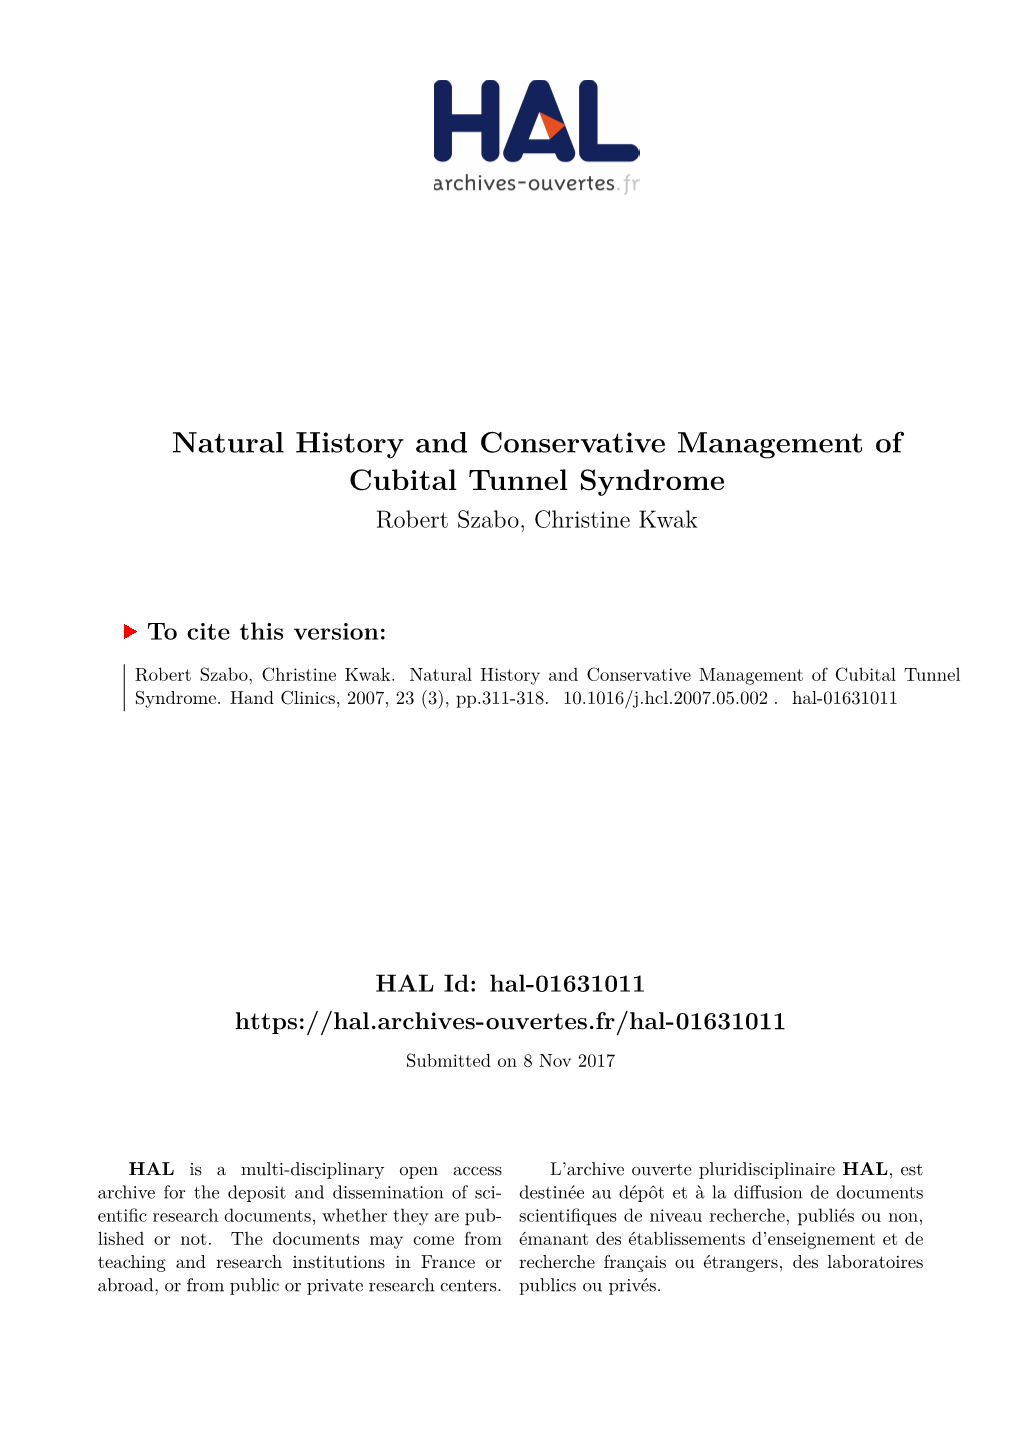 Natural History and Conservative Management of Cubital Tunnel Syndrome Robert Szabo, Christine Kwak